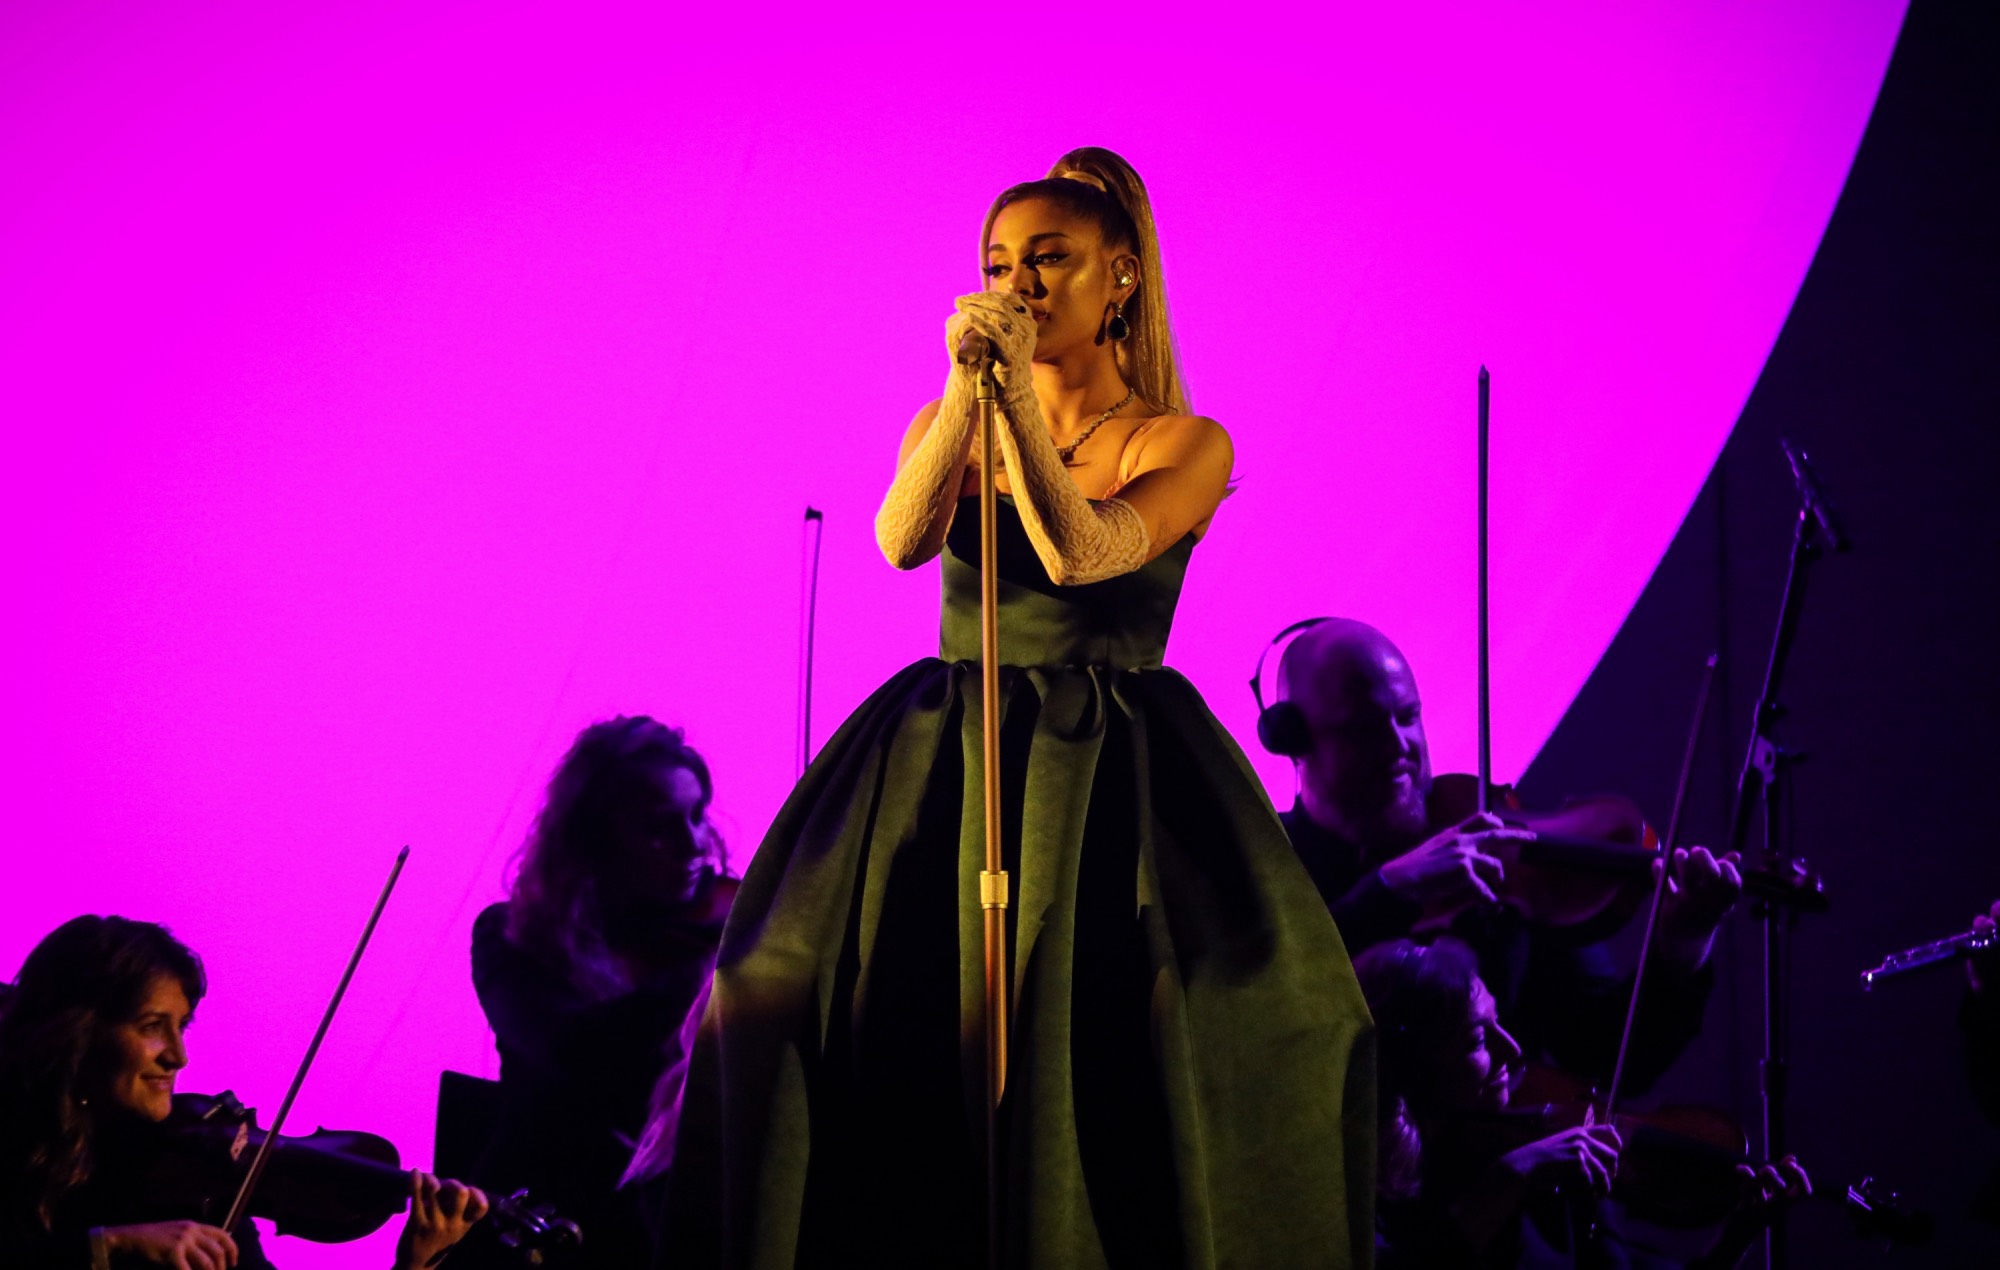 Ariana Grande shares social media posts teasing new music project